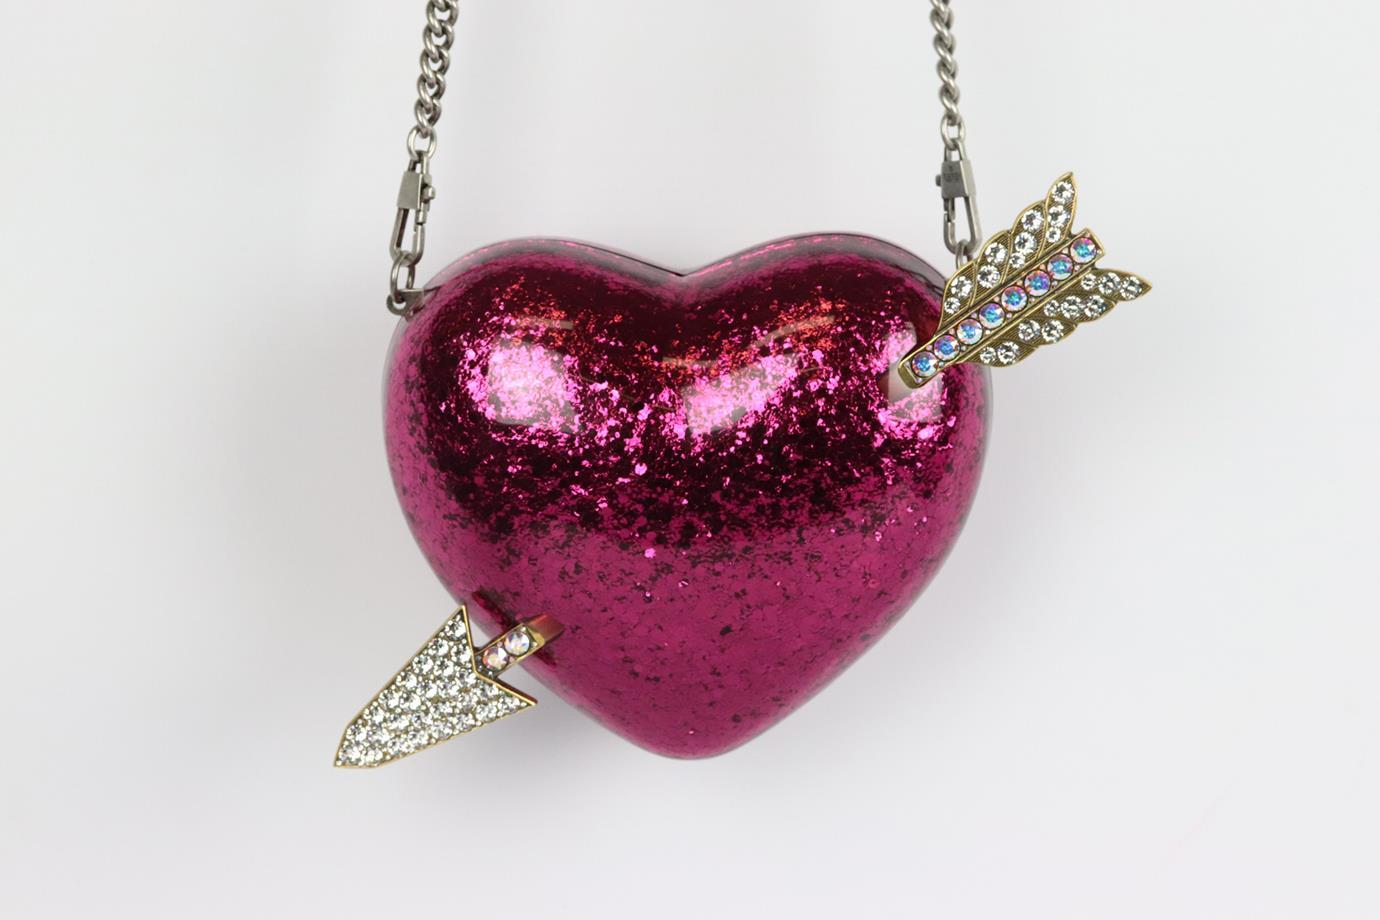 Gucci Broadway Heart crystal embellished glittered perspex shoulder bag. Made from glittered pink perspex in the shape of a heart with an antiqued-gold tone arrow. Pink perspex. Magnetic snap fastening at top. Does not come with dustbag or box.